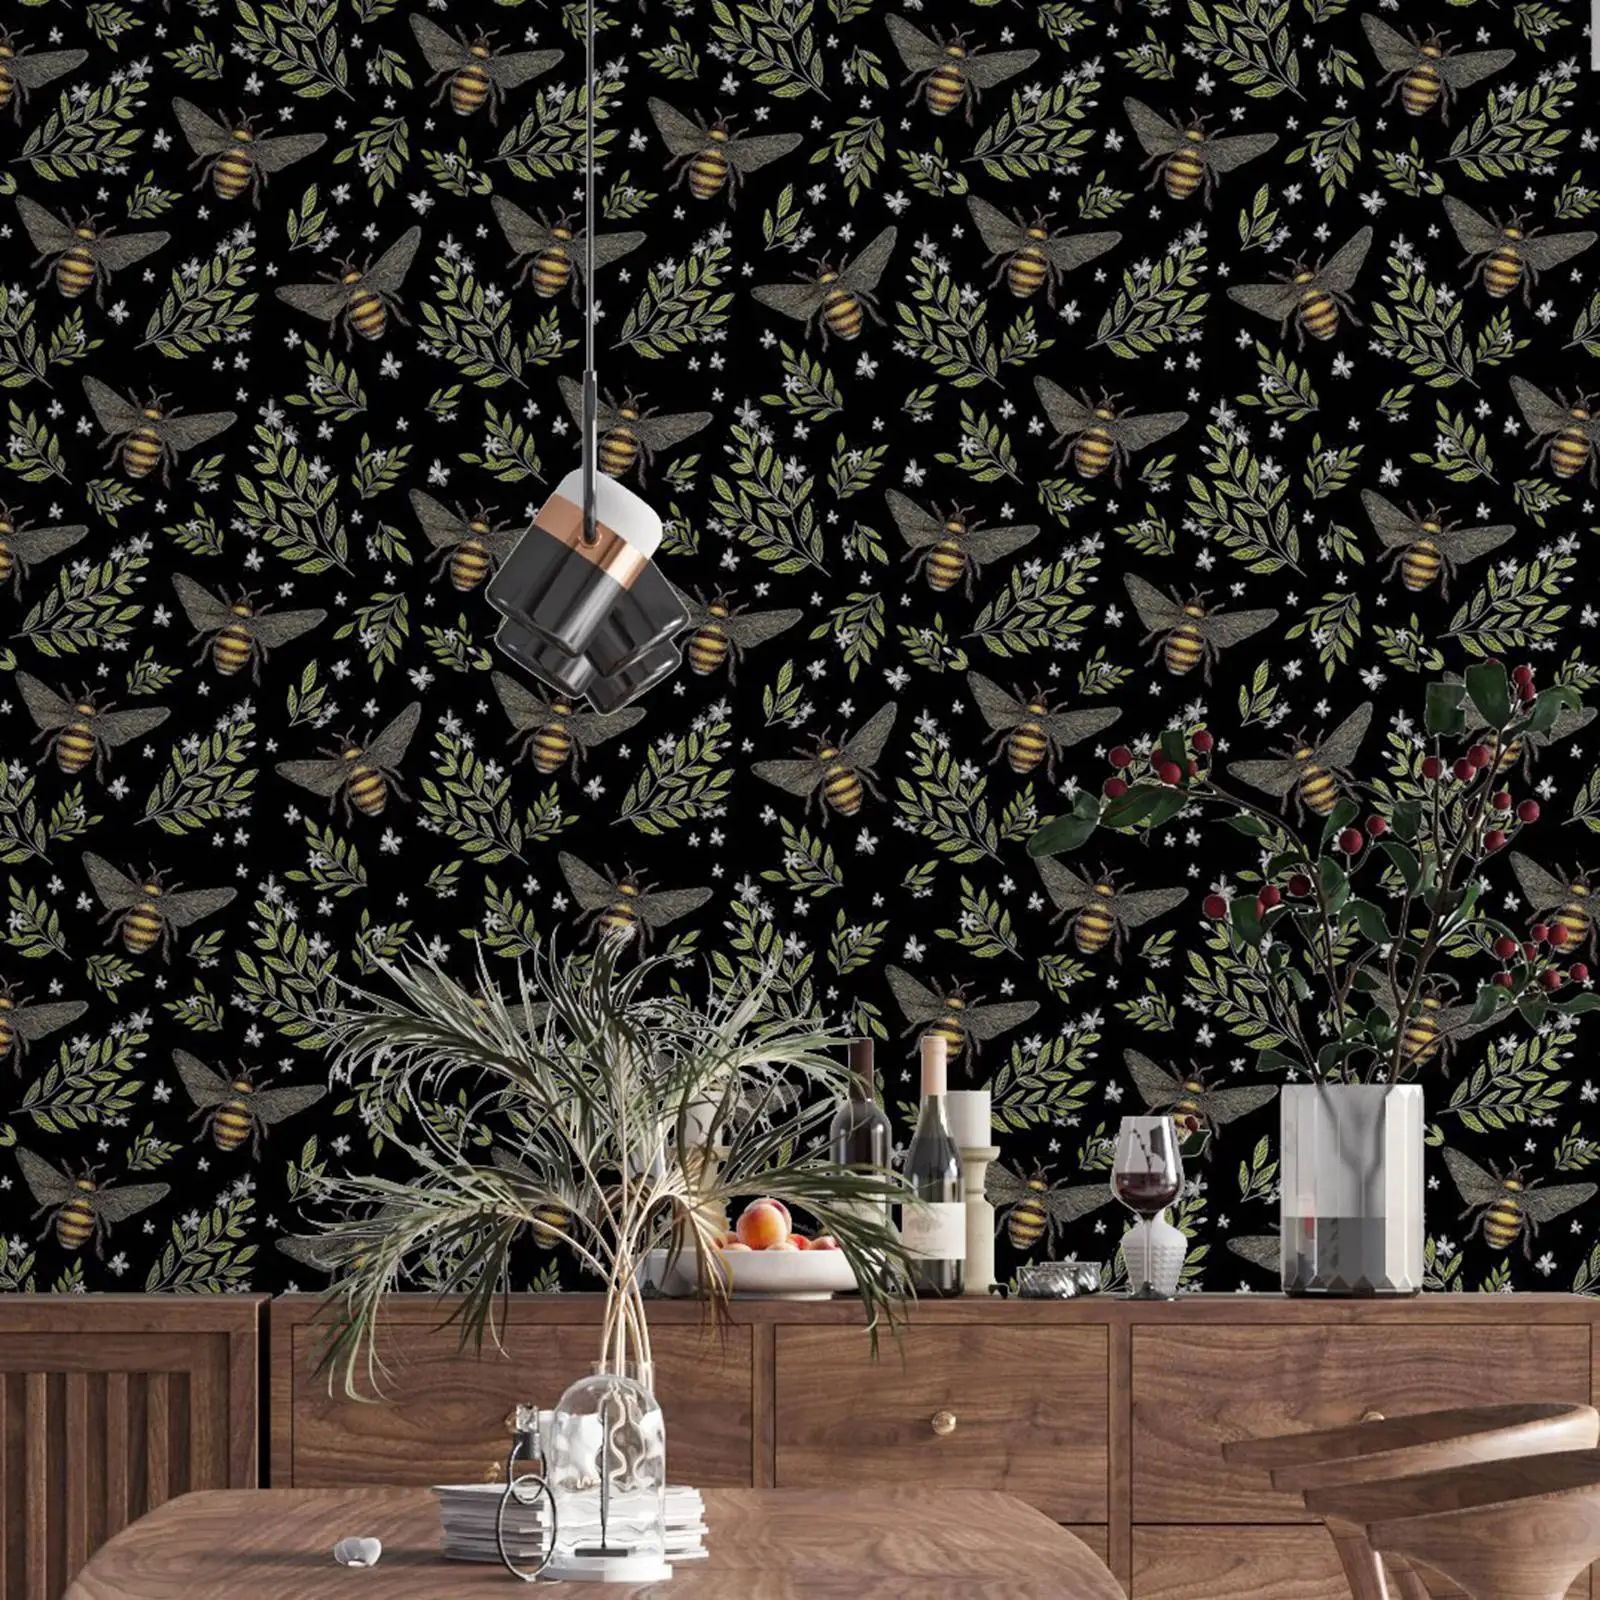 Spring Bee Removable Wallpaper in Midnight Black, Honey Bee Wall Paper in black back ground for living room bedroom HB0624001 сотовый телефон honor x5 plus 4 64gb midnight black